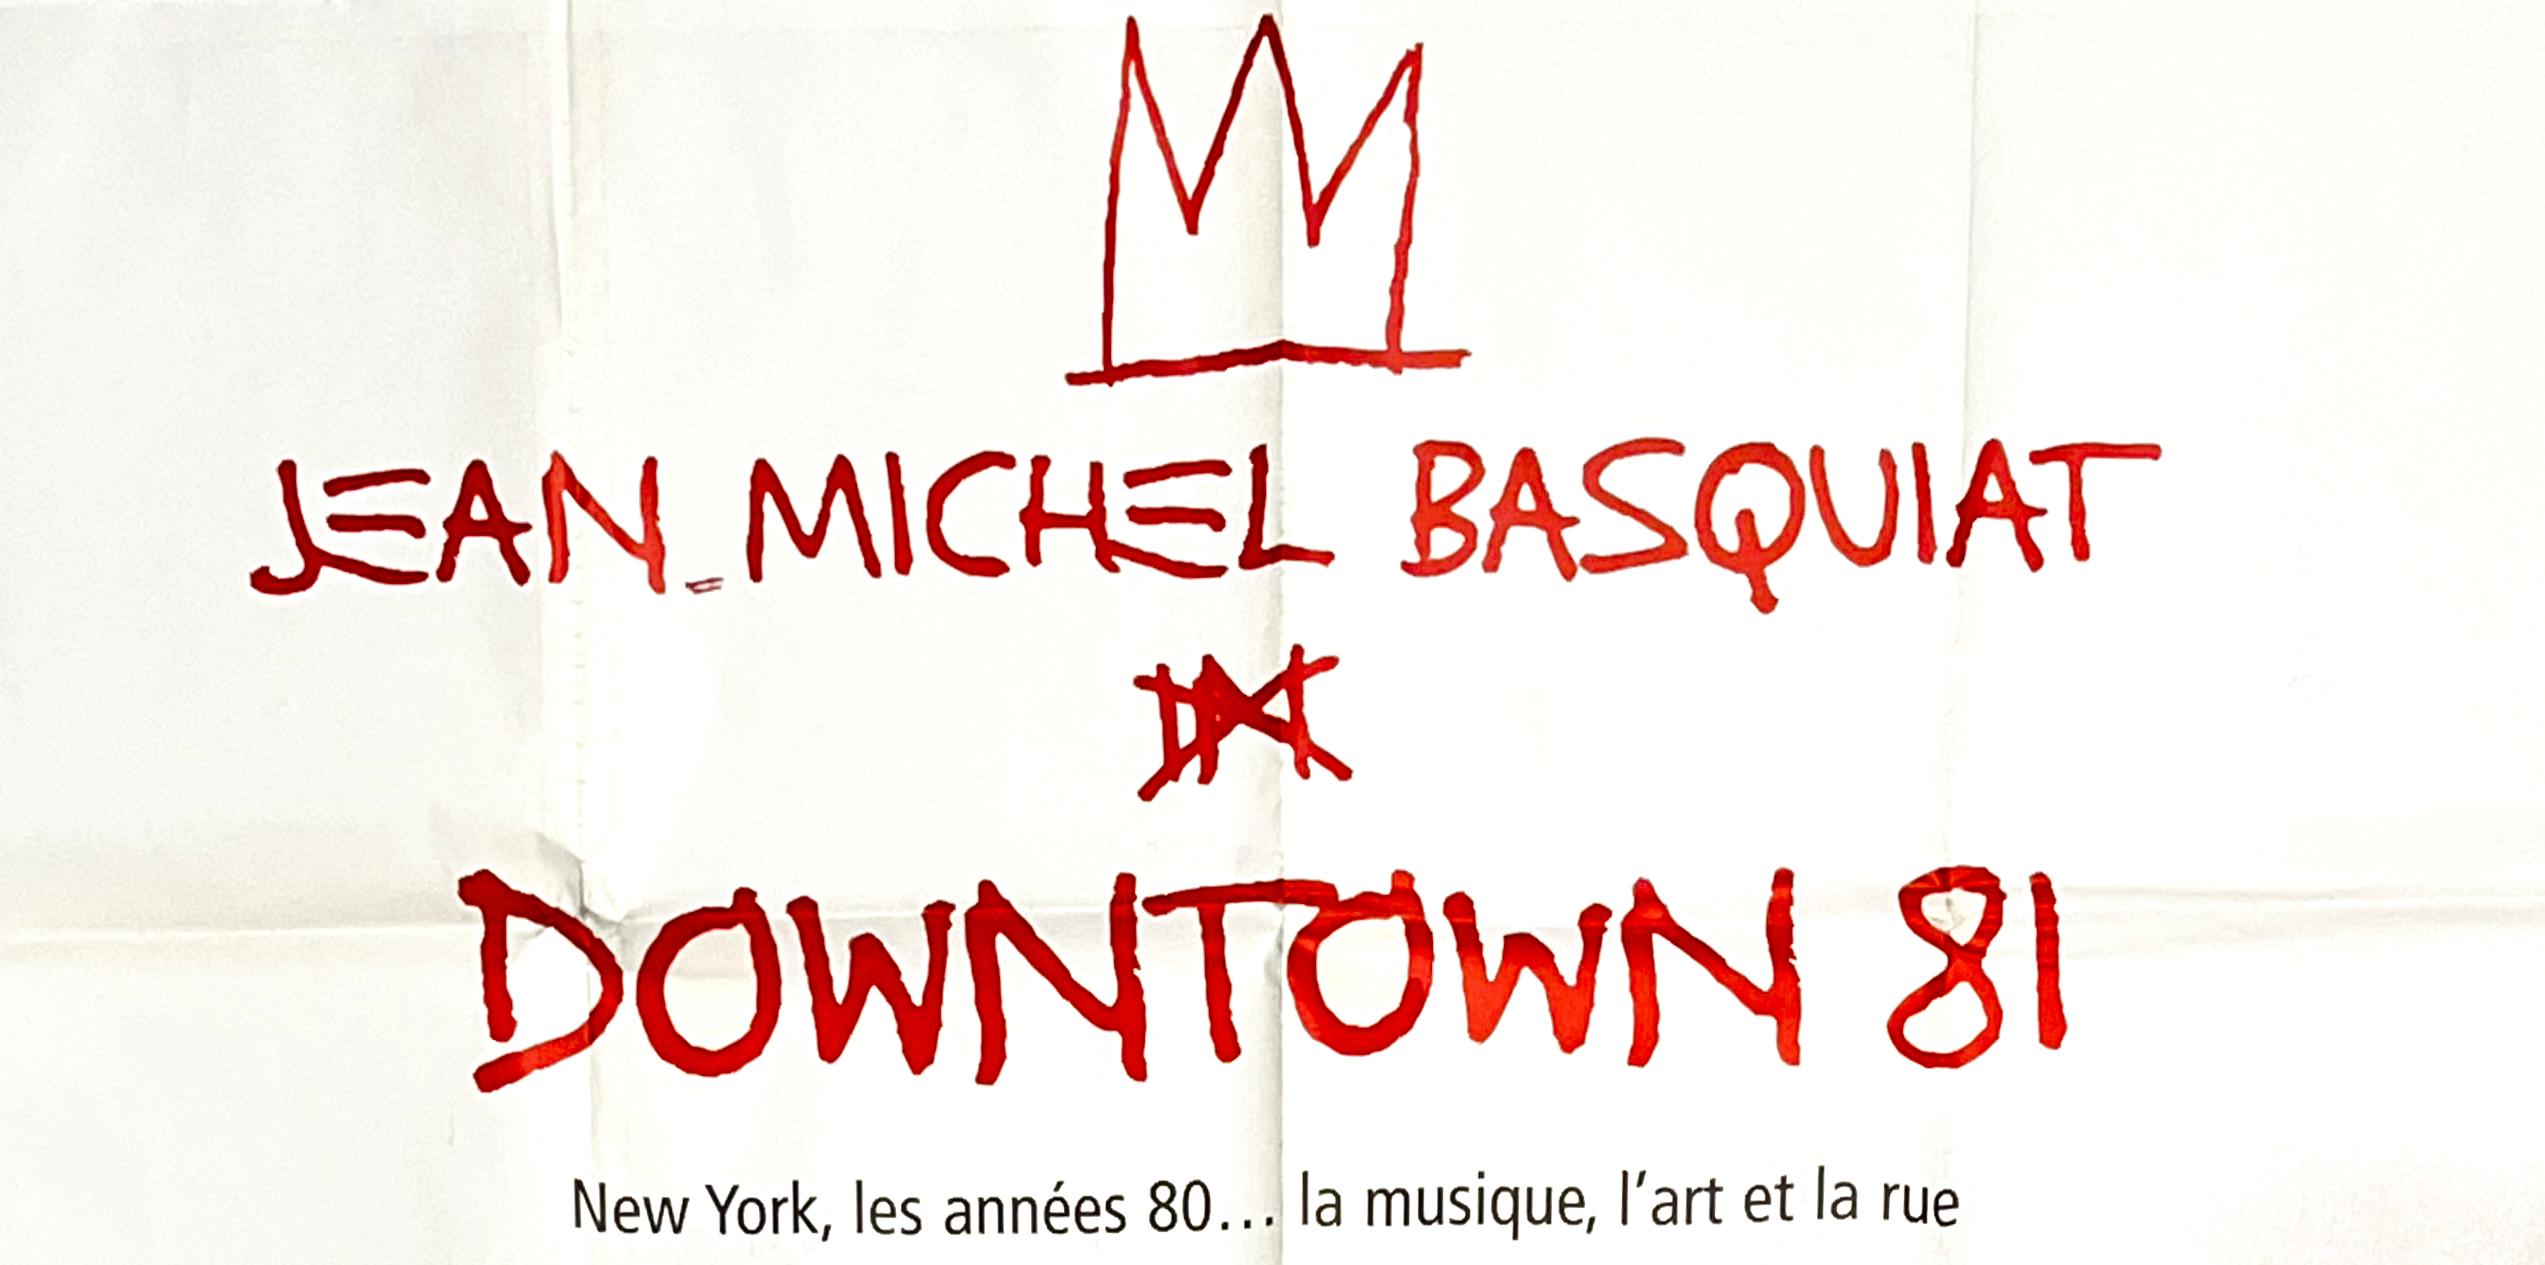 Jean-Michel Basquiat Downtown 81:
A rare massive-sized theatrical poster  published circa 2001 to promote the historical early 1980s Basquiat film: Downtown 81. A highly collectible vintage Basquiat wall art piece that is perfect for a loft or